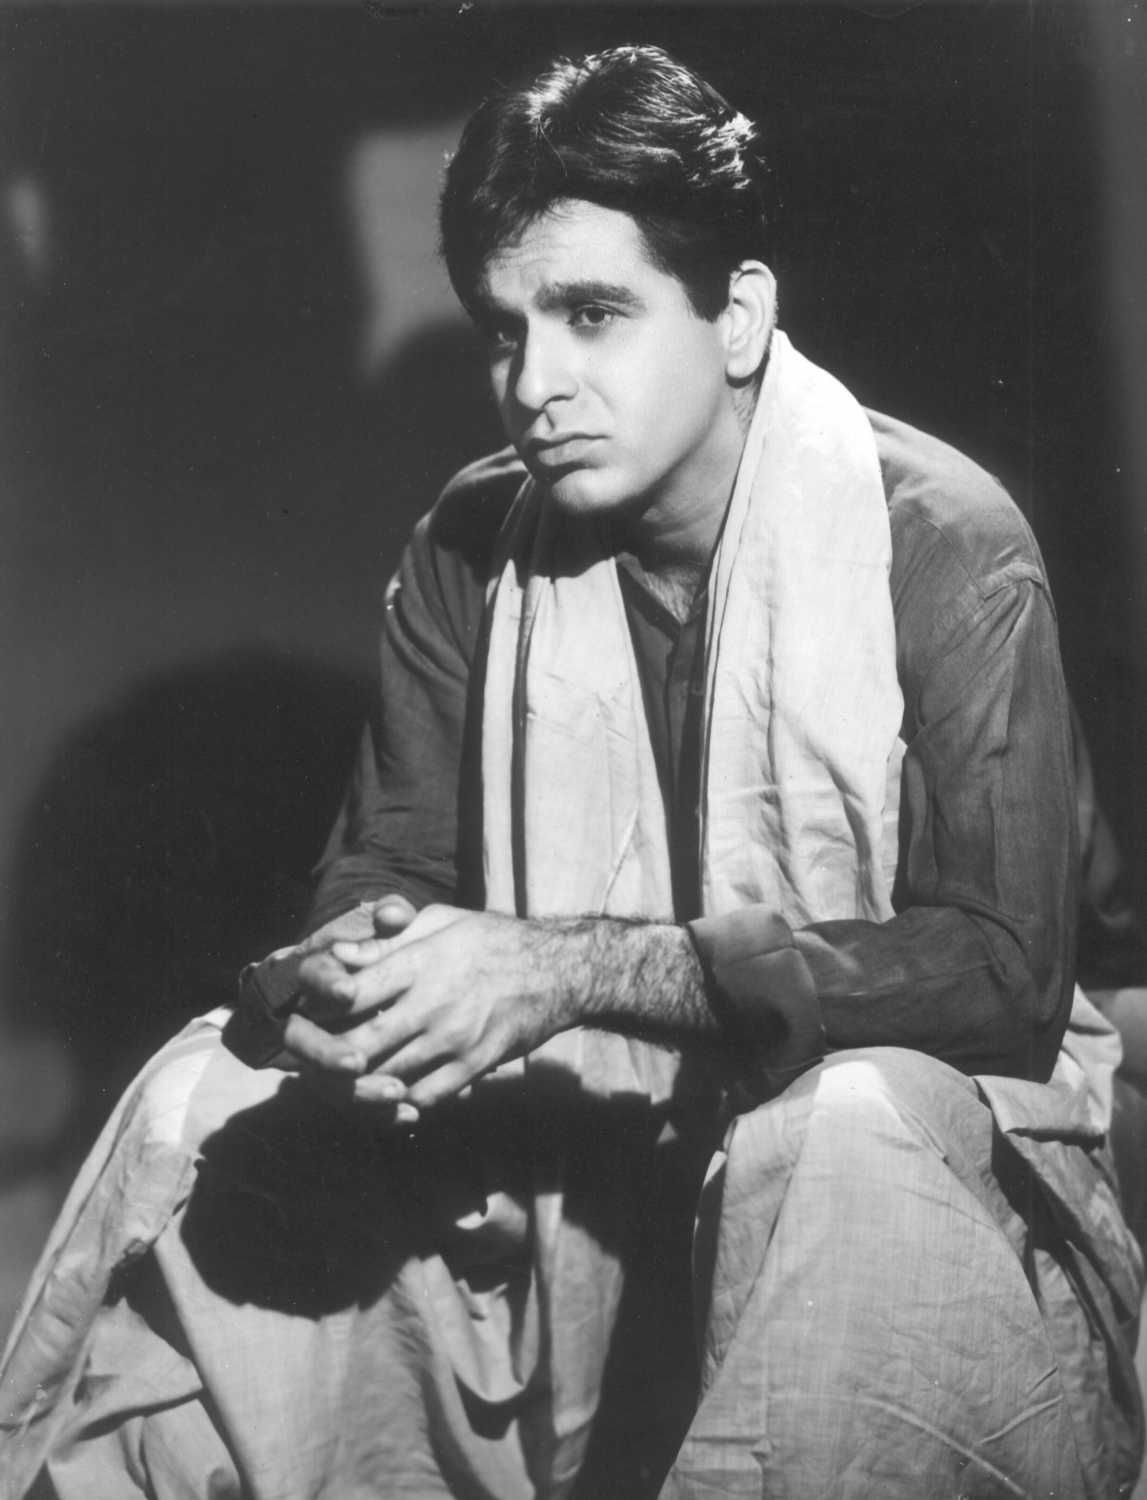 Dilip Kumar photo and image.com. Old film stars, Legendary picture, Bollywood picture